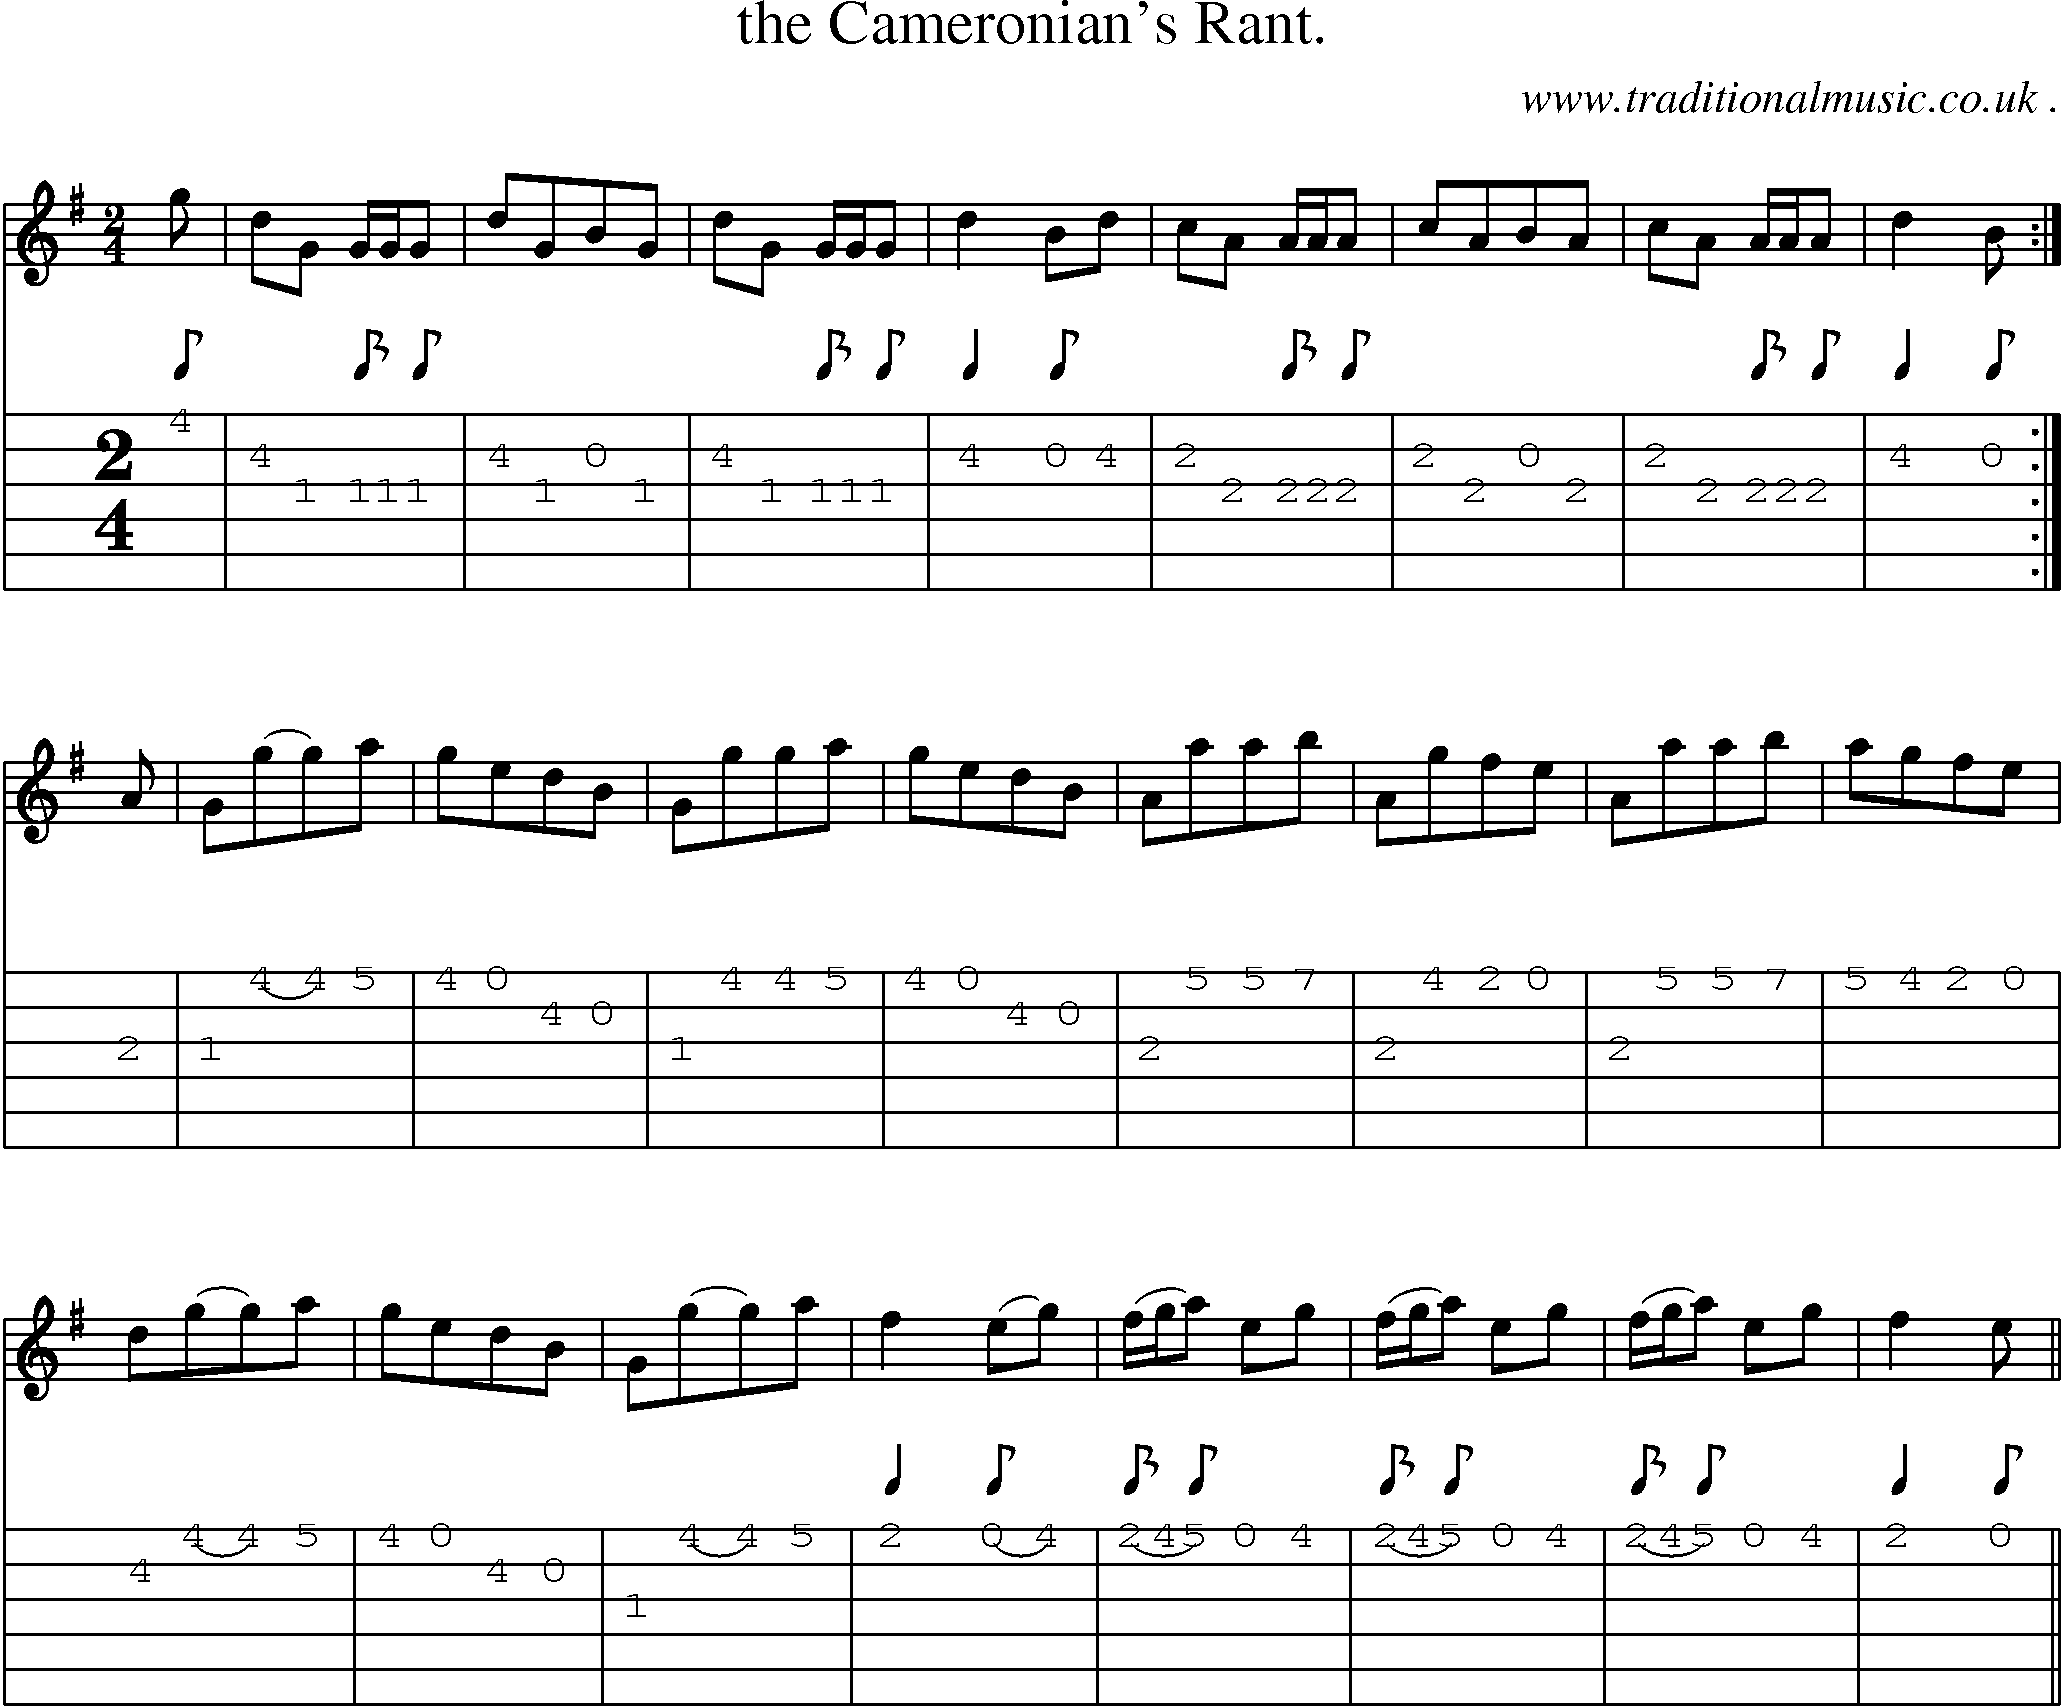 Sheet-Music and Guitar Tabs for The Cameronians Rant